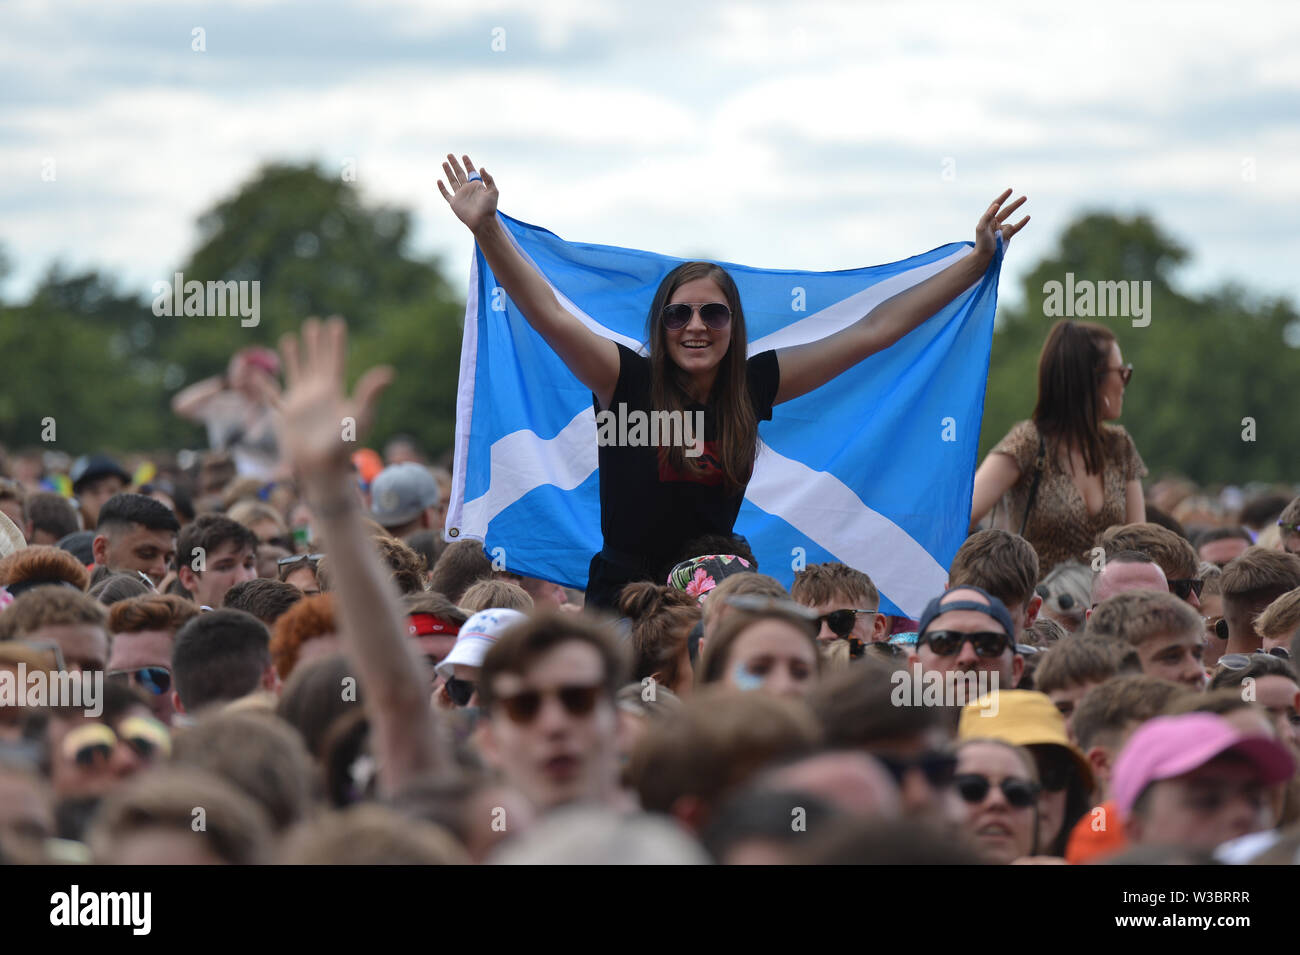 Glasgow, UK. 14 July 2019. The Kooks live in Concert at TRNSMT Music Festival on the main stage. Luke Pritchard takes centre stage.Credit: Colin Fisher/Alamy Live NEws Stock Photo